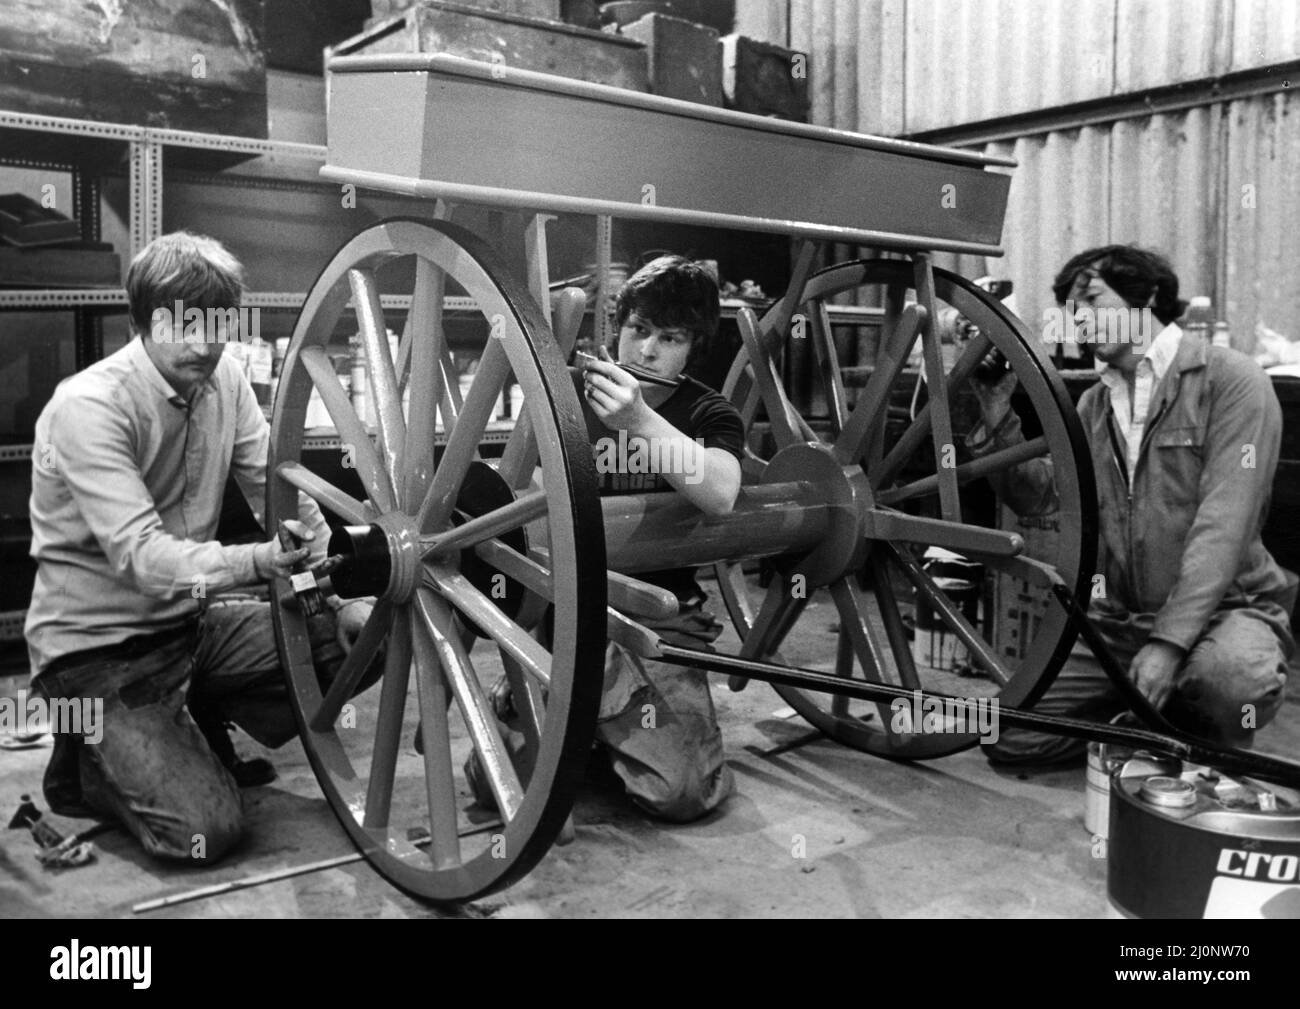 Stockton Preston Hall Museum, 15th July 1983. A trio of job creation workers have launched a Cleveland museums big push to get its collections of historic hand carts on the street. The three men on the Manpower Services Commission scheme at Stockton Preston Hall Museum have set the wheels in motion by starting renovation work on a 60 year old industrial fire cart donatedby a private collector. Pictured working on it are l-r Ivor Jenkinson, Nigel Alexander and Brian Hope. And when they have finished with that, they will move onto the other carts in the collection at Preston Hall Museum, Yarm Ro Stock Photo